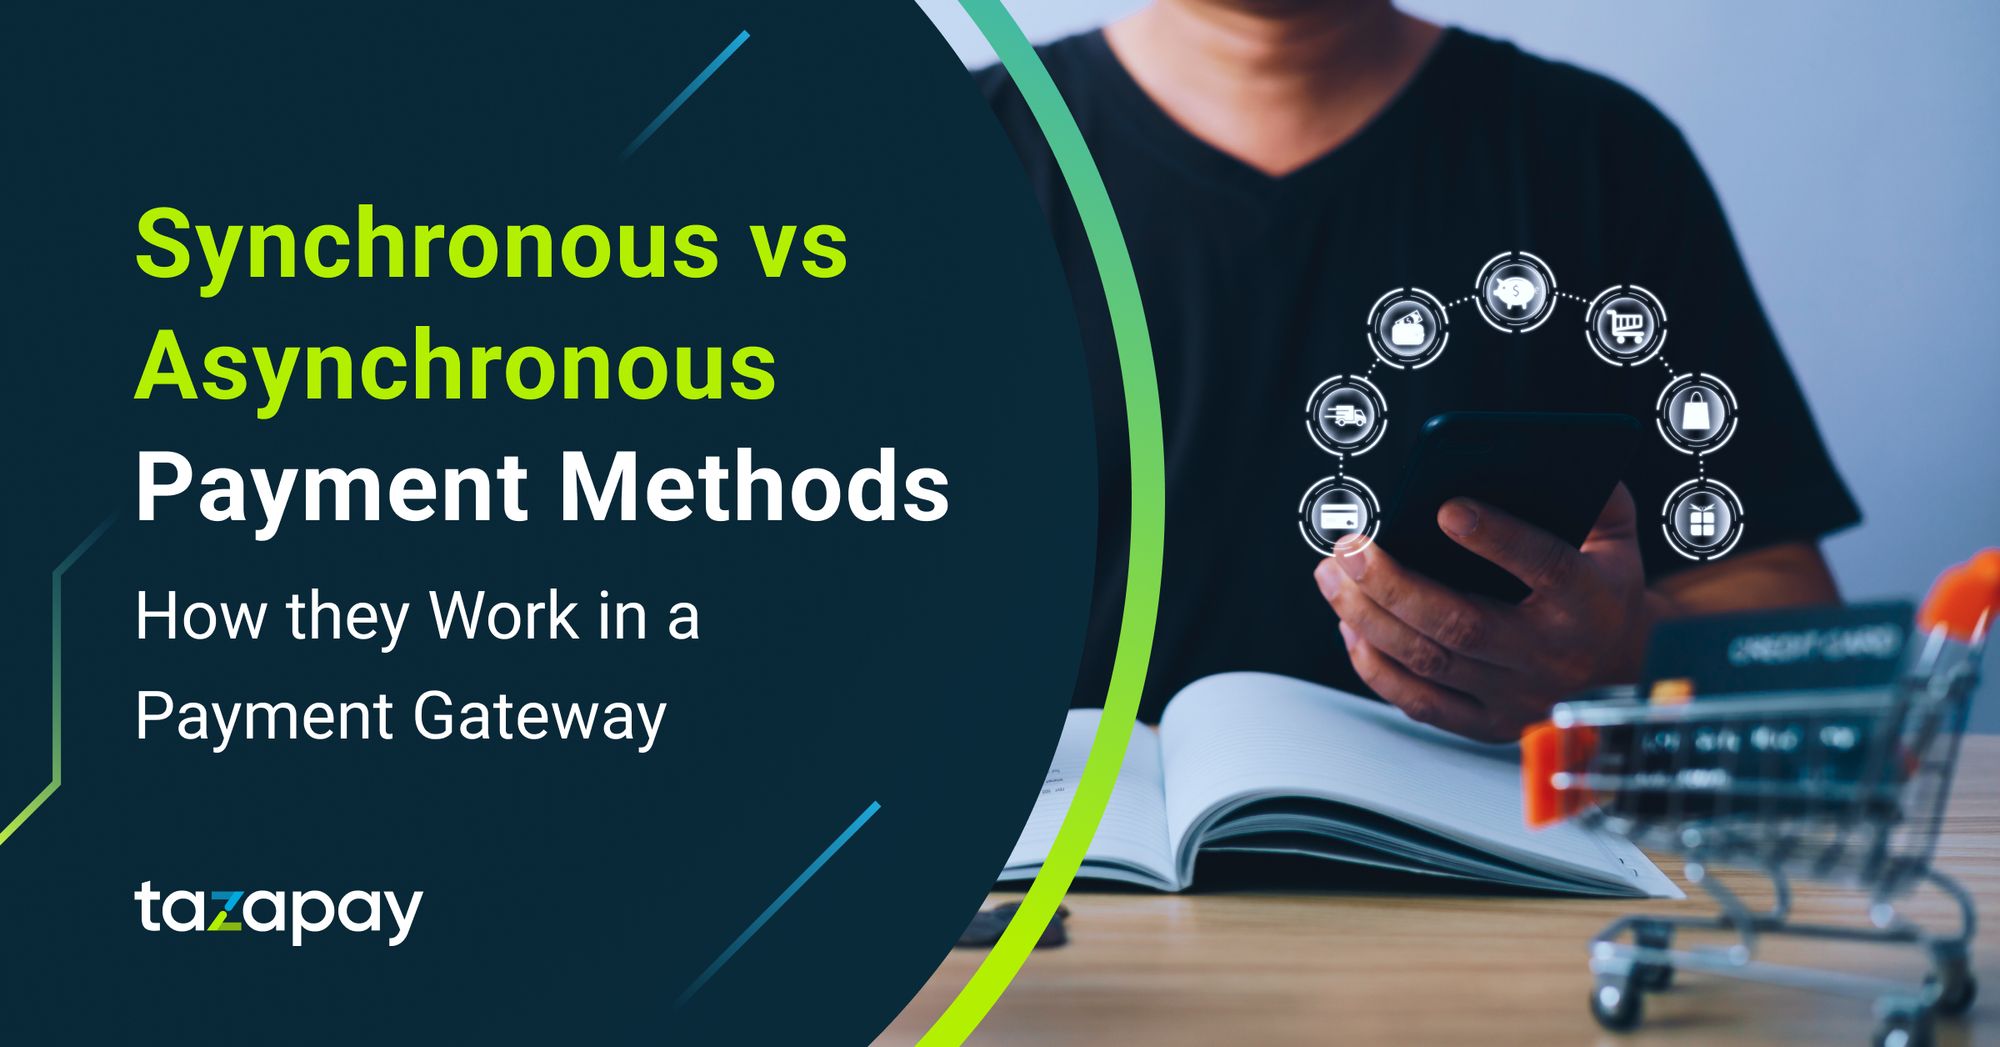 Synchronous vs Asynchronous Payment Methods: How They Work in an International Payment Gateway